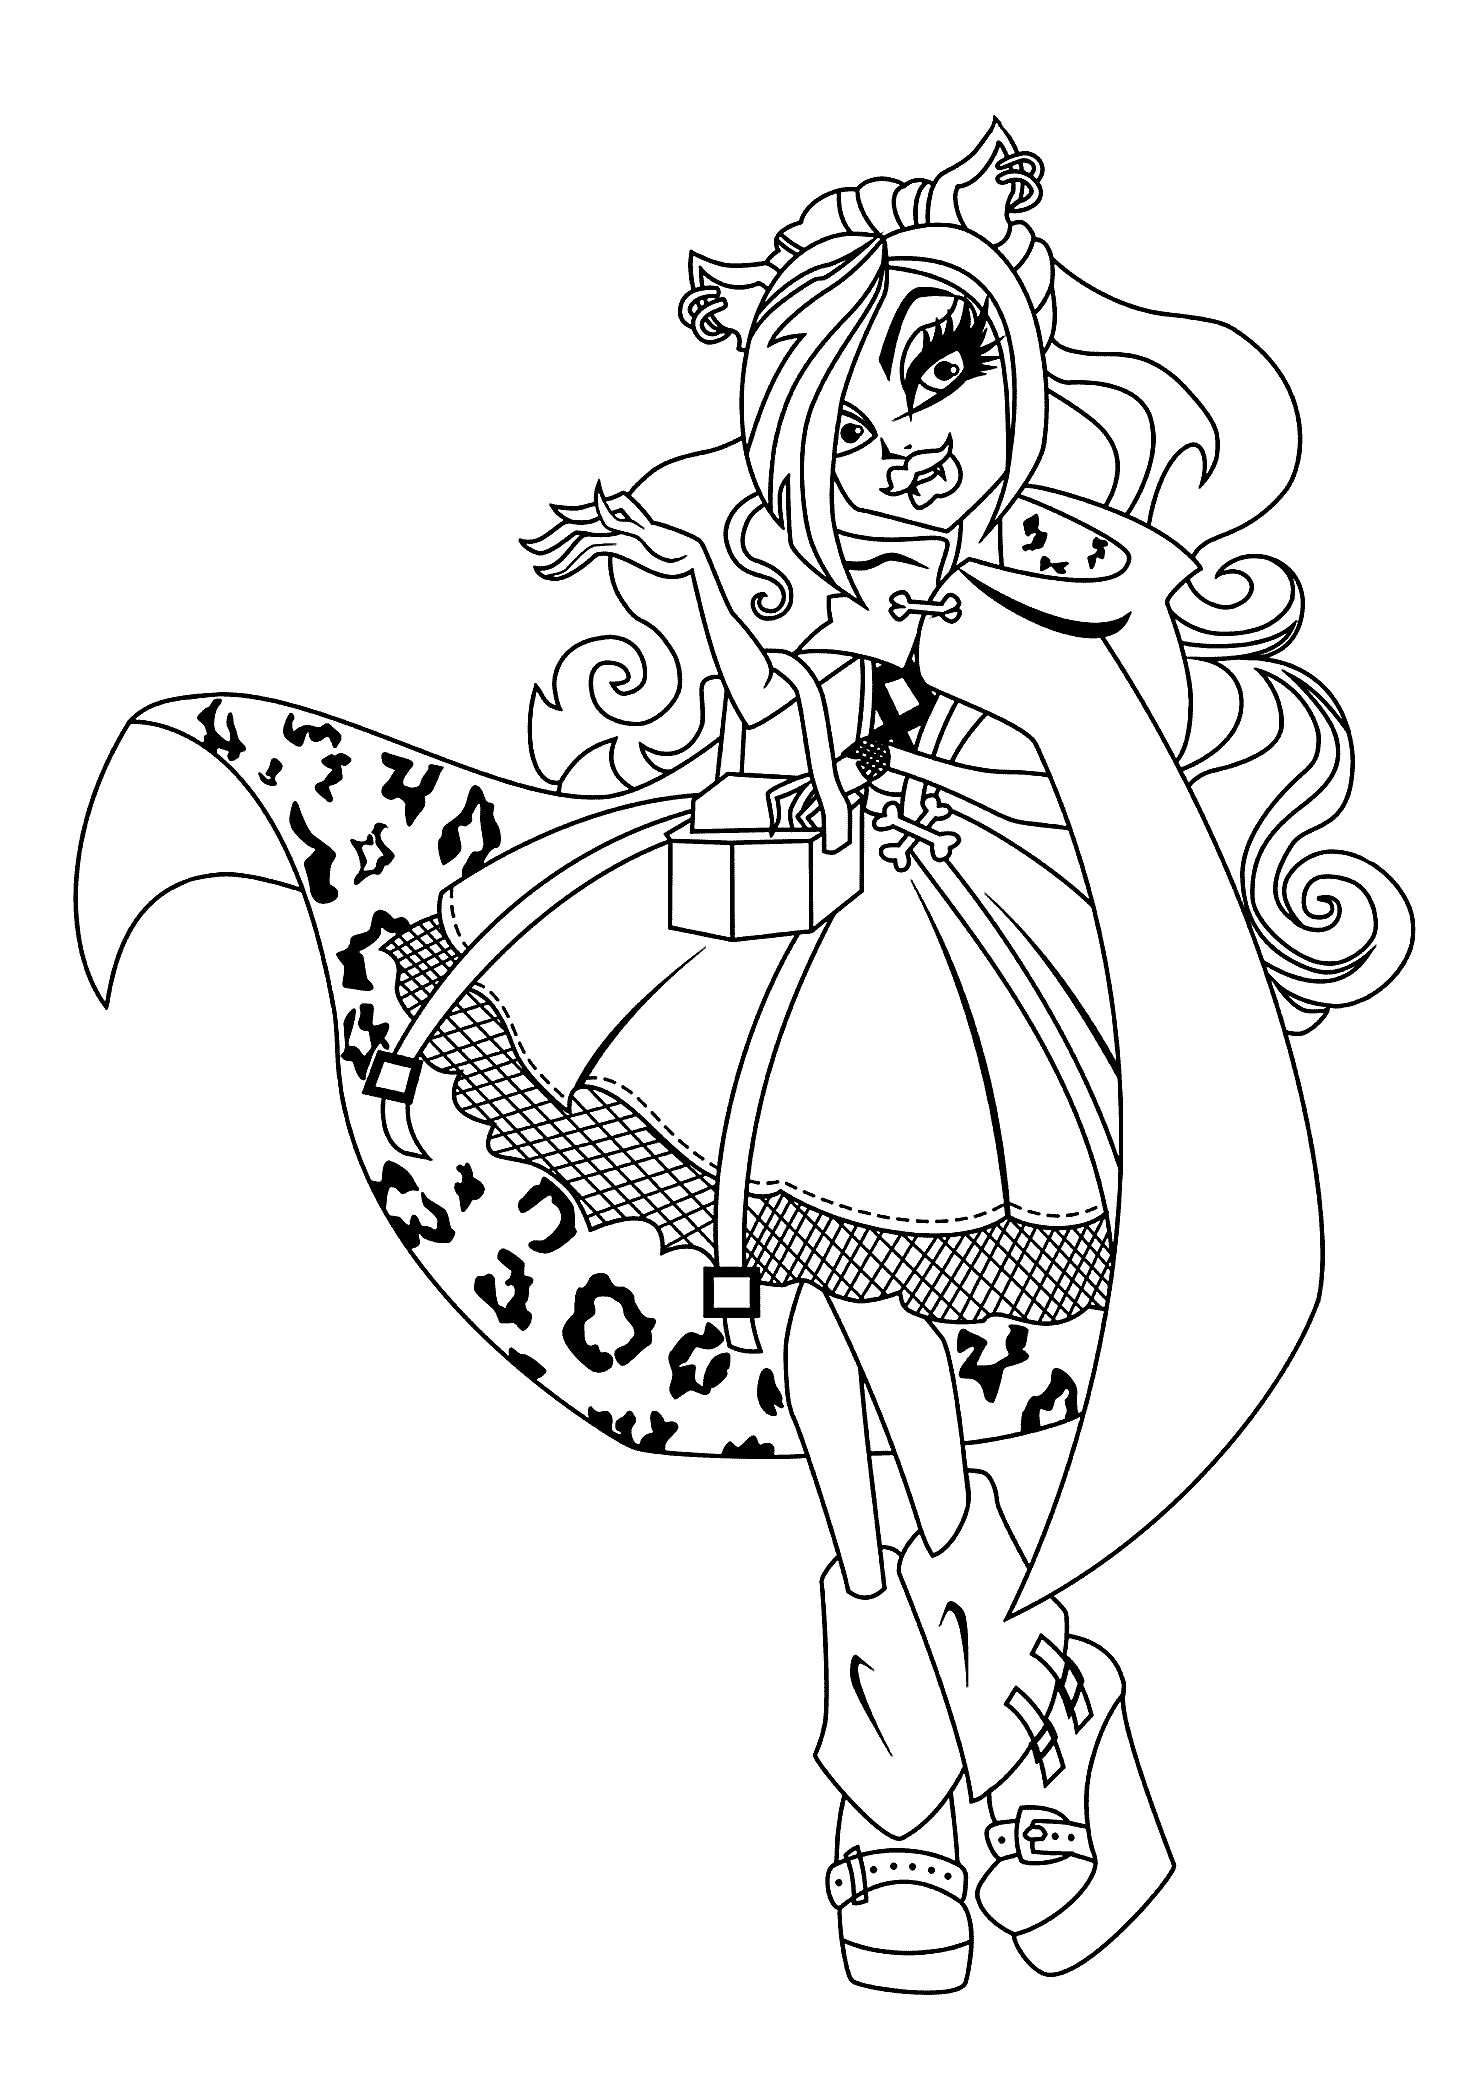 monster high free colouring pages coloring pages monster high coloring pages free and printable pages free colouring high monster 